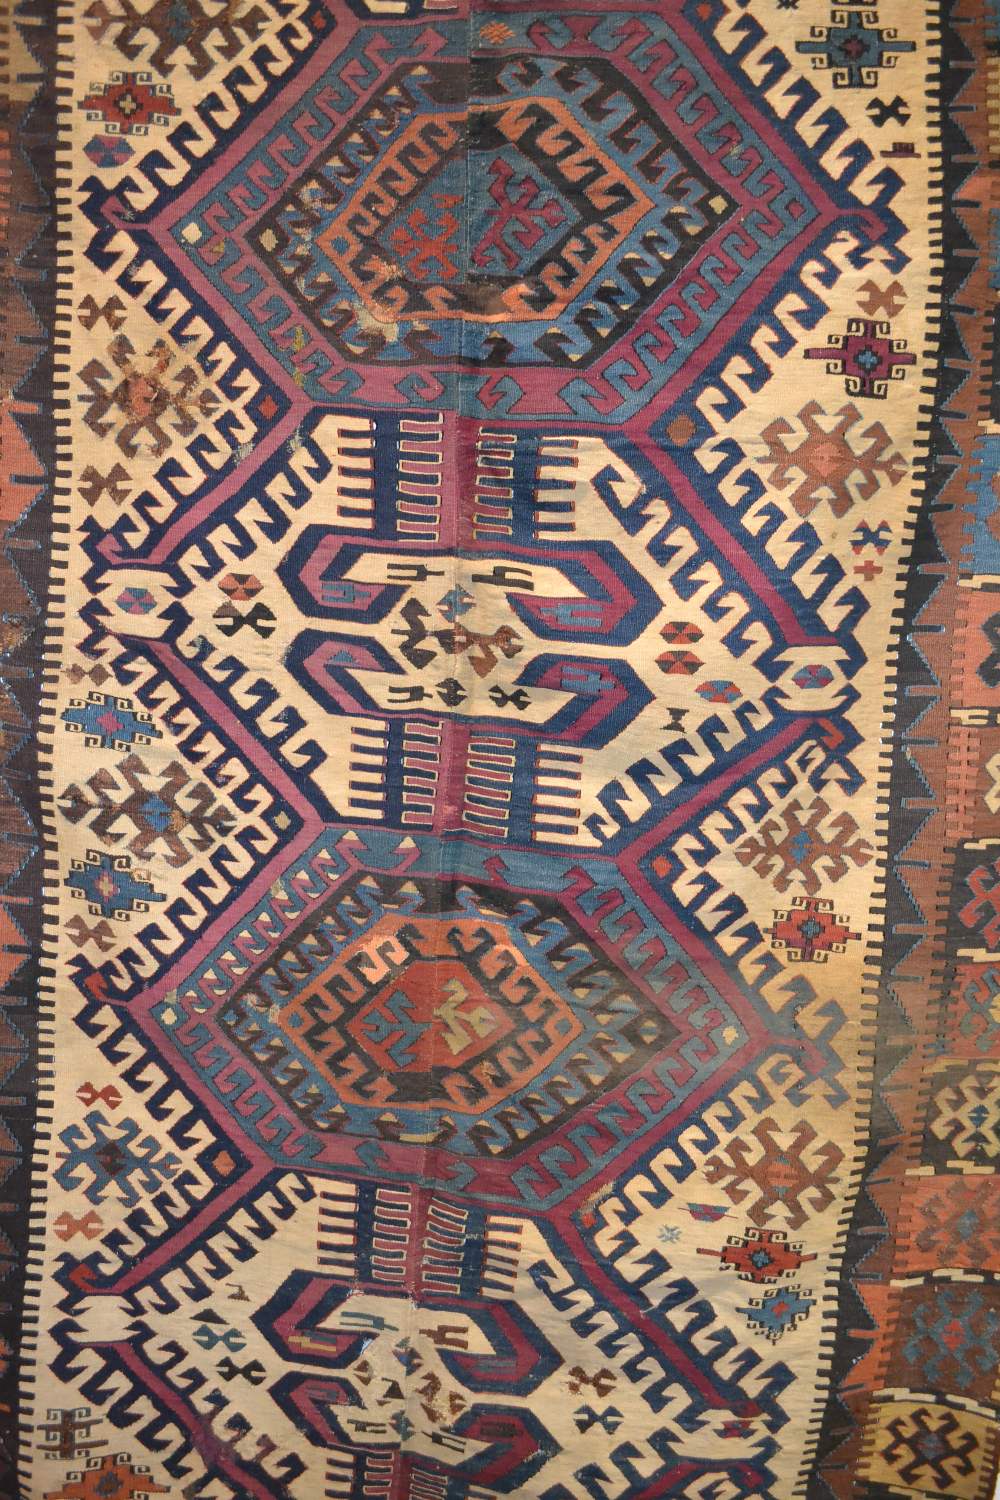 Fragmented Konya kelim, central Anatolia, second half 19th century, 7ft. 9in. x 5ft. 2.36m. x 1.52m. - Image 2 of 5